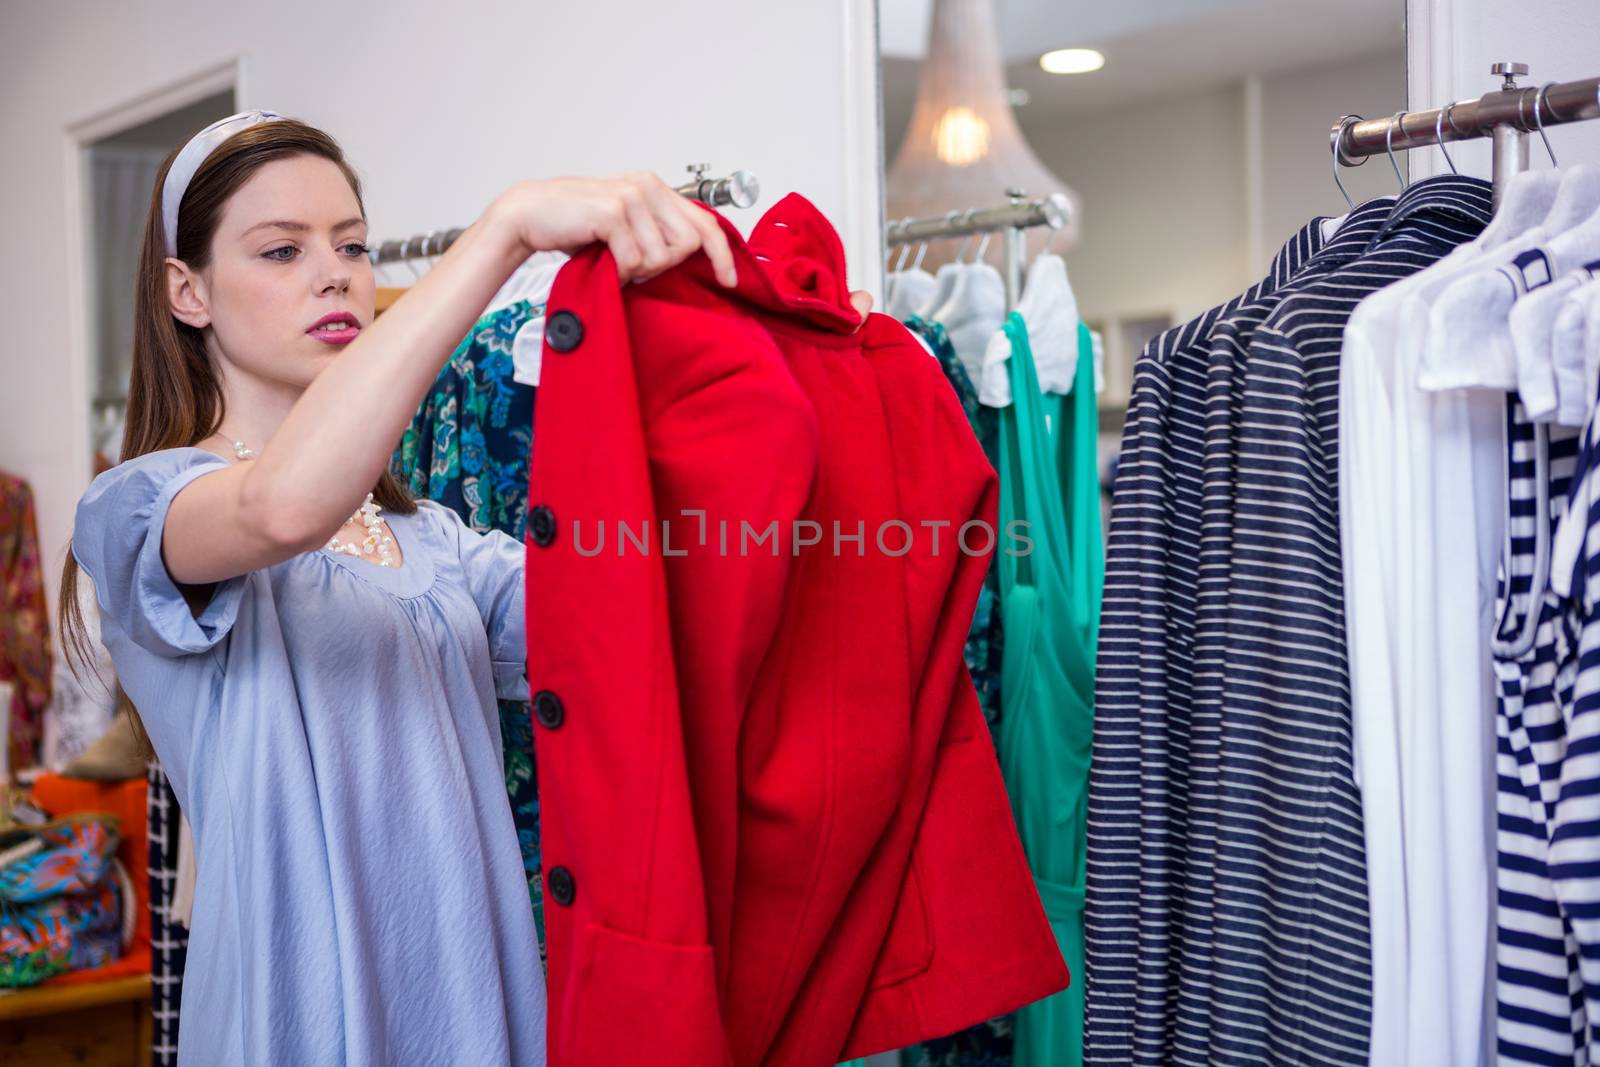 Brunette trying on a red coat by Wavebreakmedia